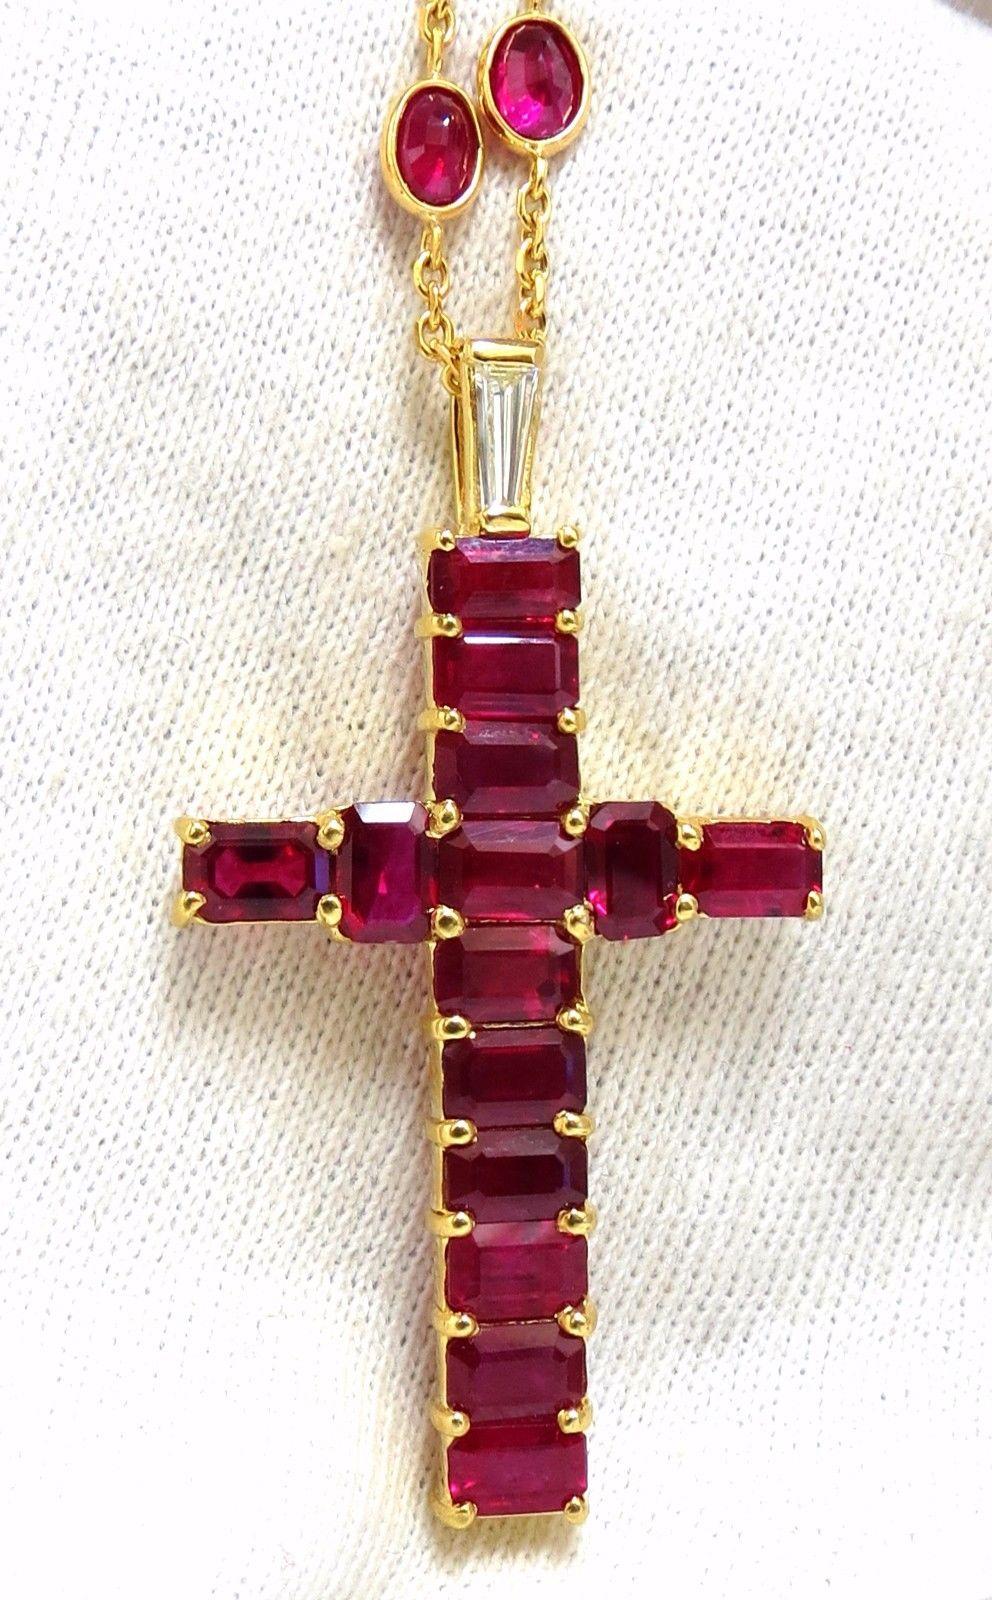 Rosary Novena Reds.

24.50ct. Natural Ruby Cross necklace.

Cross consists of 9.50ct emerald cut rubies.

14 count

Average each: 6 x 4mm

Vs-2 clarity.

Rubies on Necklace: 3.5 X 5.5mm.

30 Count.

All Rubies of vivid red colors, full cuts.

Clean